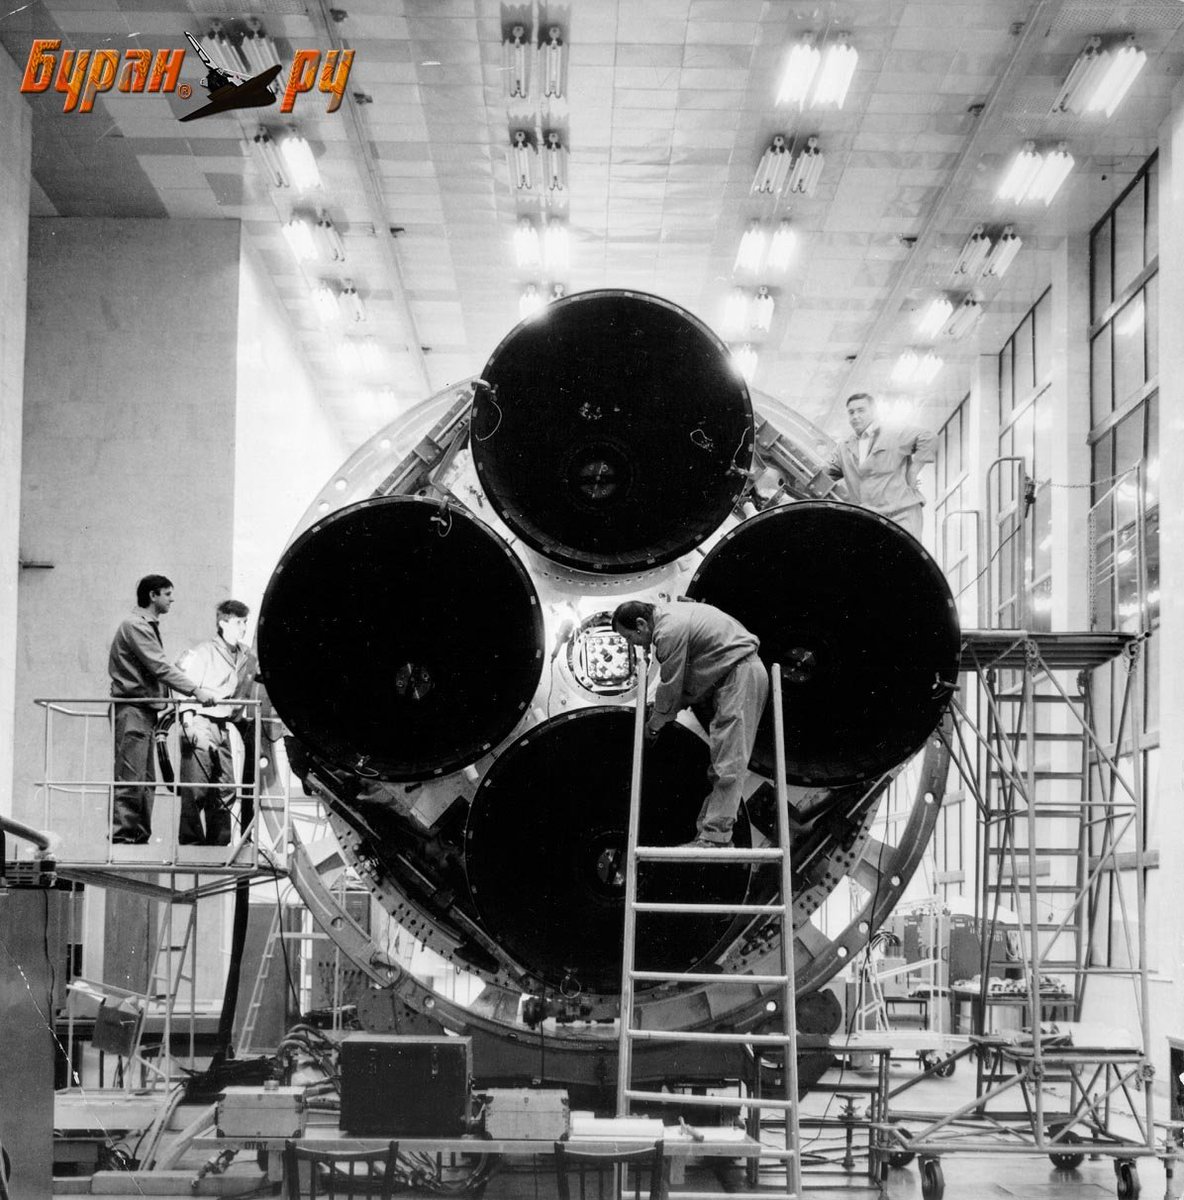 The side boosters burnt for 140 seconds and then separated in pairs at an altitude of 53 km at a speed of 1.8 km/s.